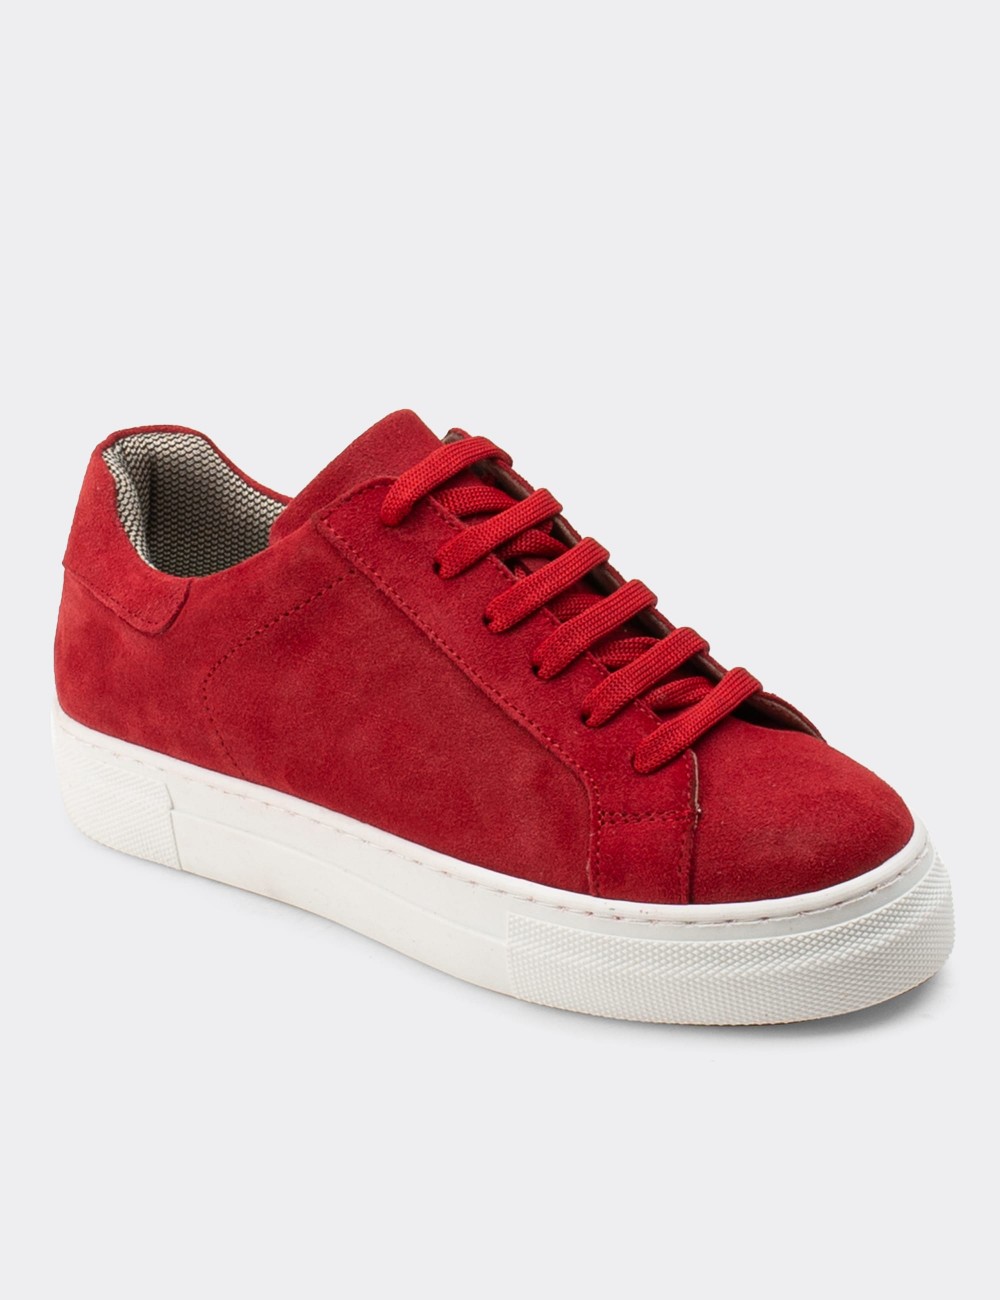 Red Suede Leather Sneakers - Z1681ZKRMC01